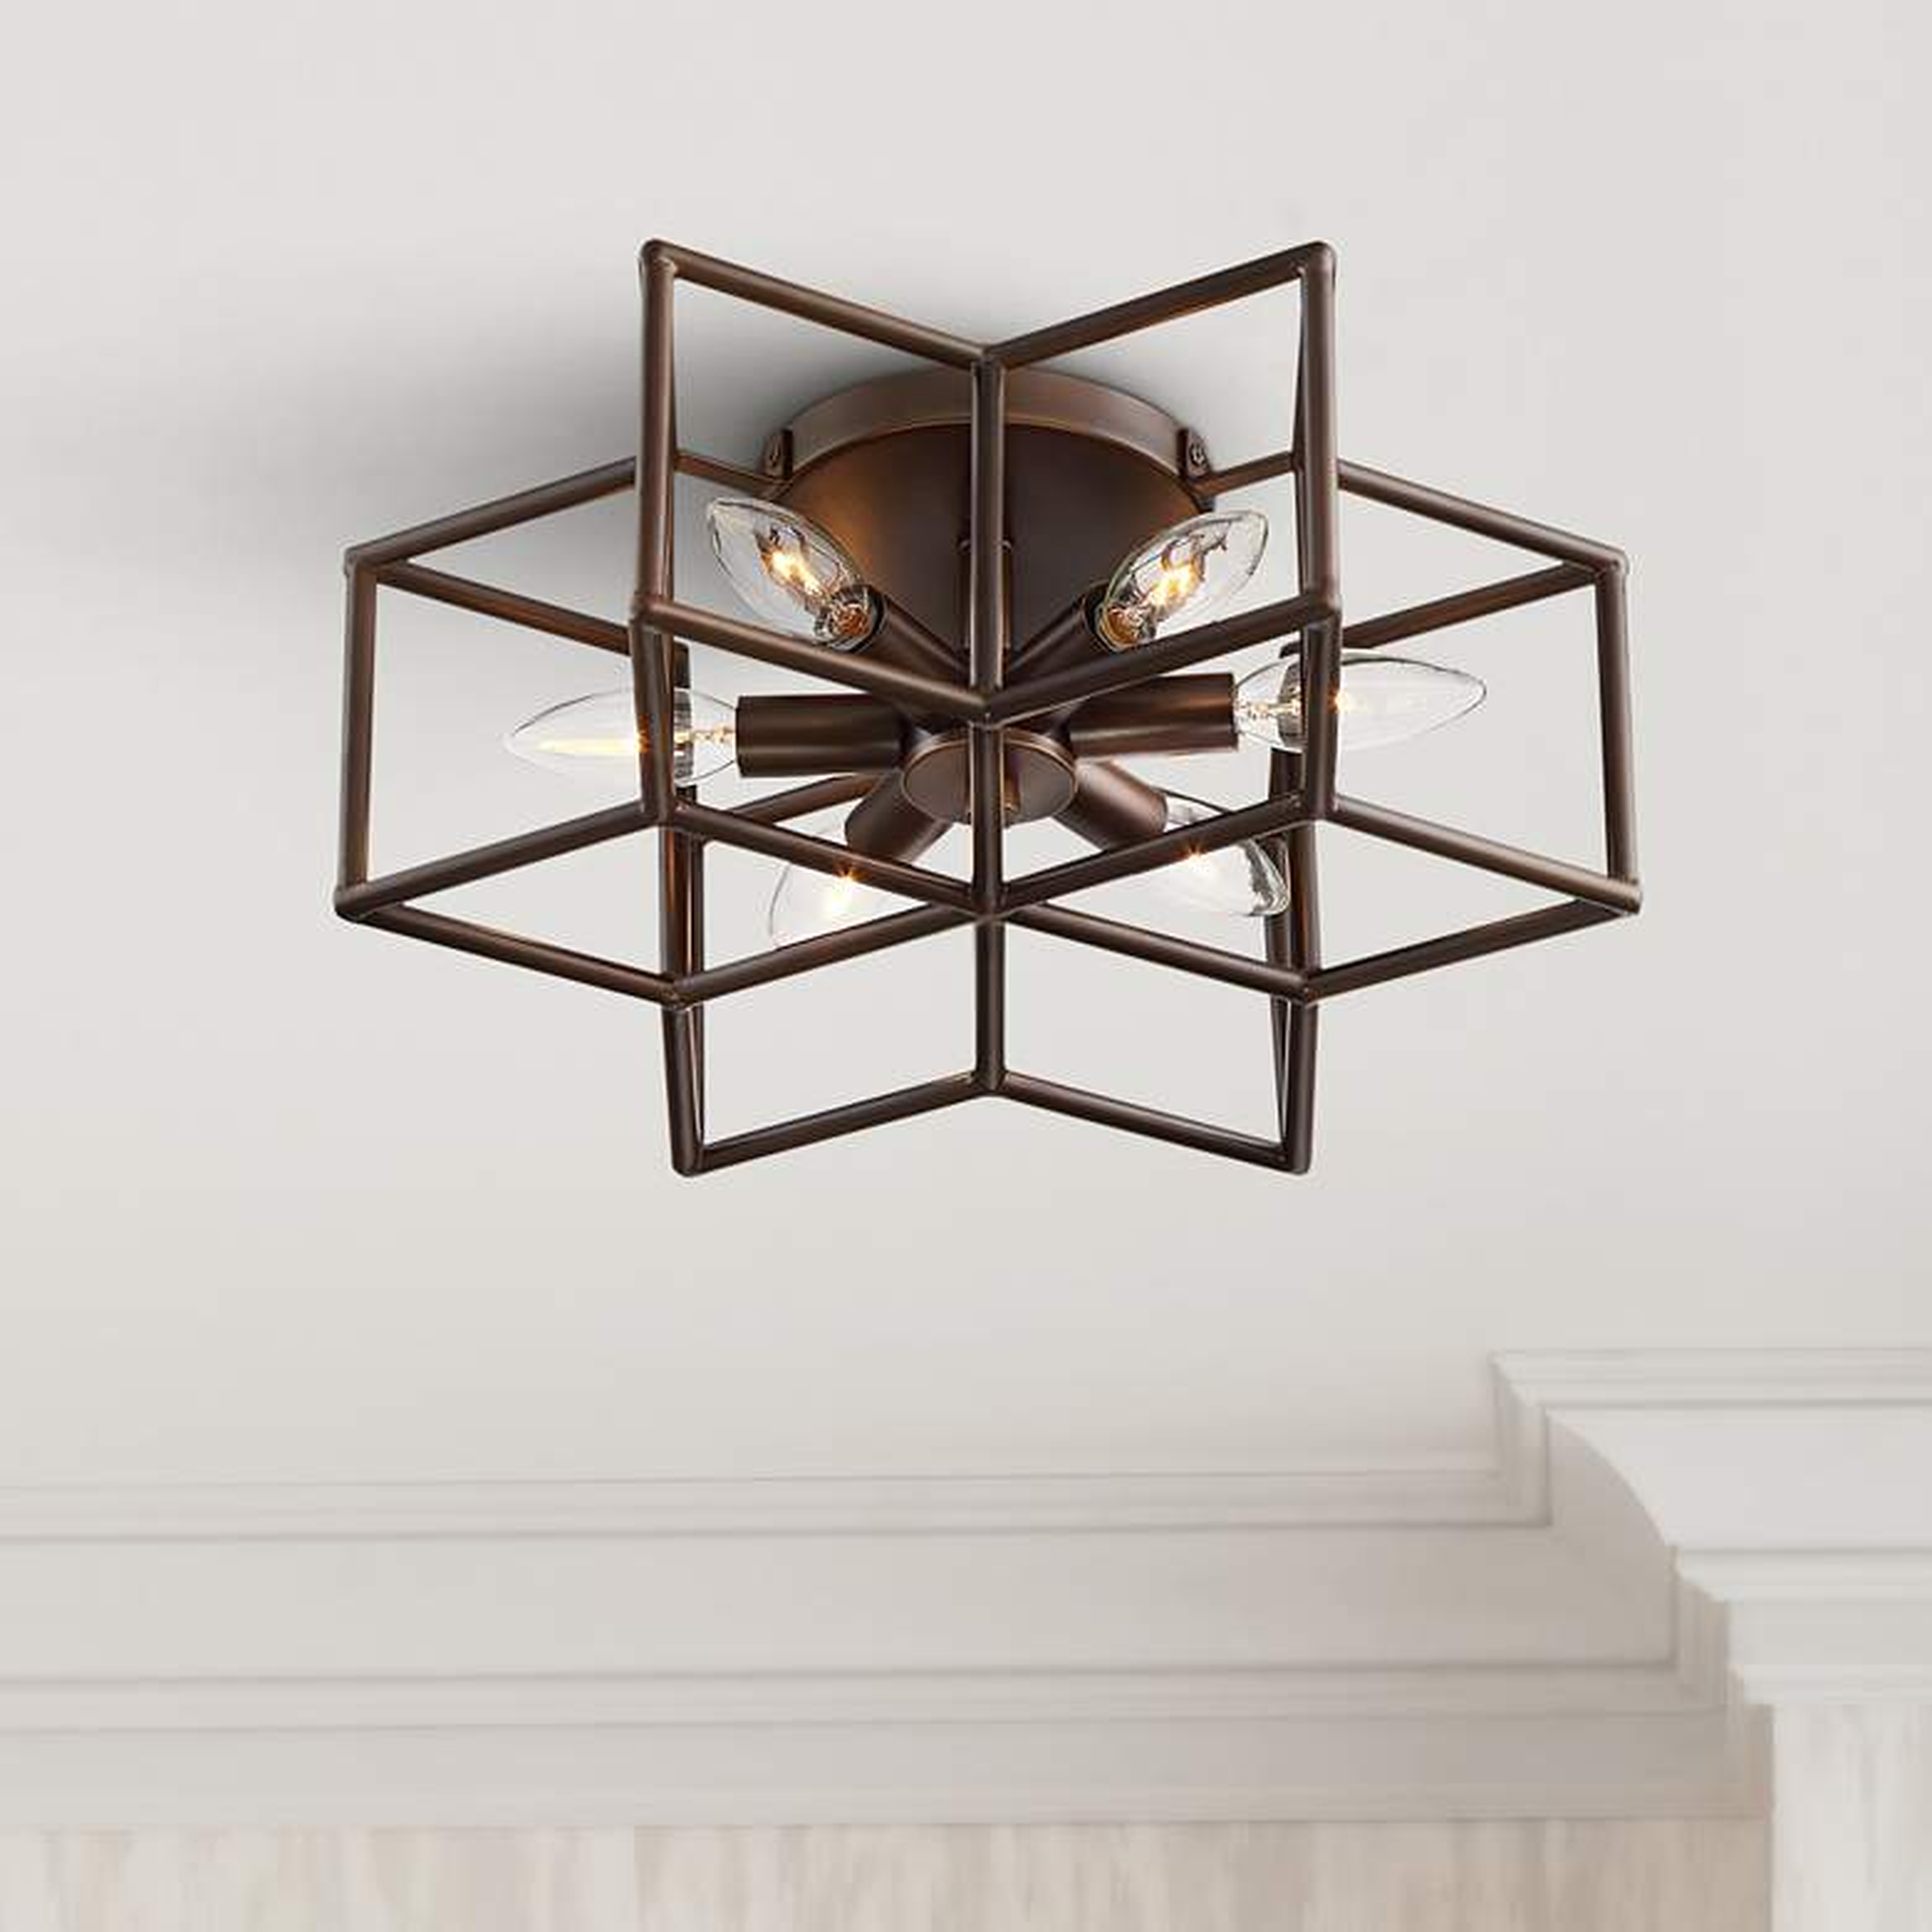 Cosmos 6-Point Star Oil-Rubbed Bronze 6-Light Ceiling Light - Style # 65K88 - Lamps Plus